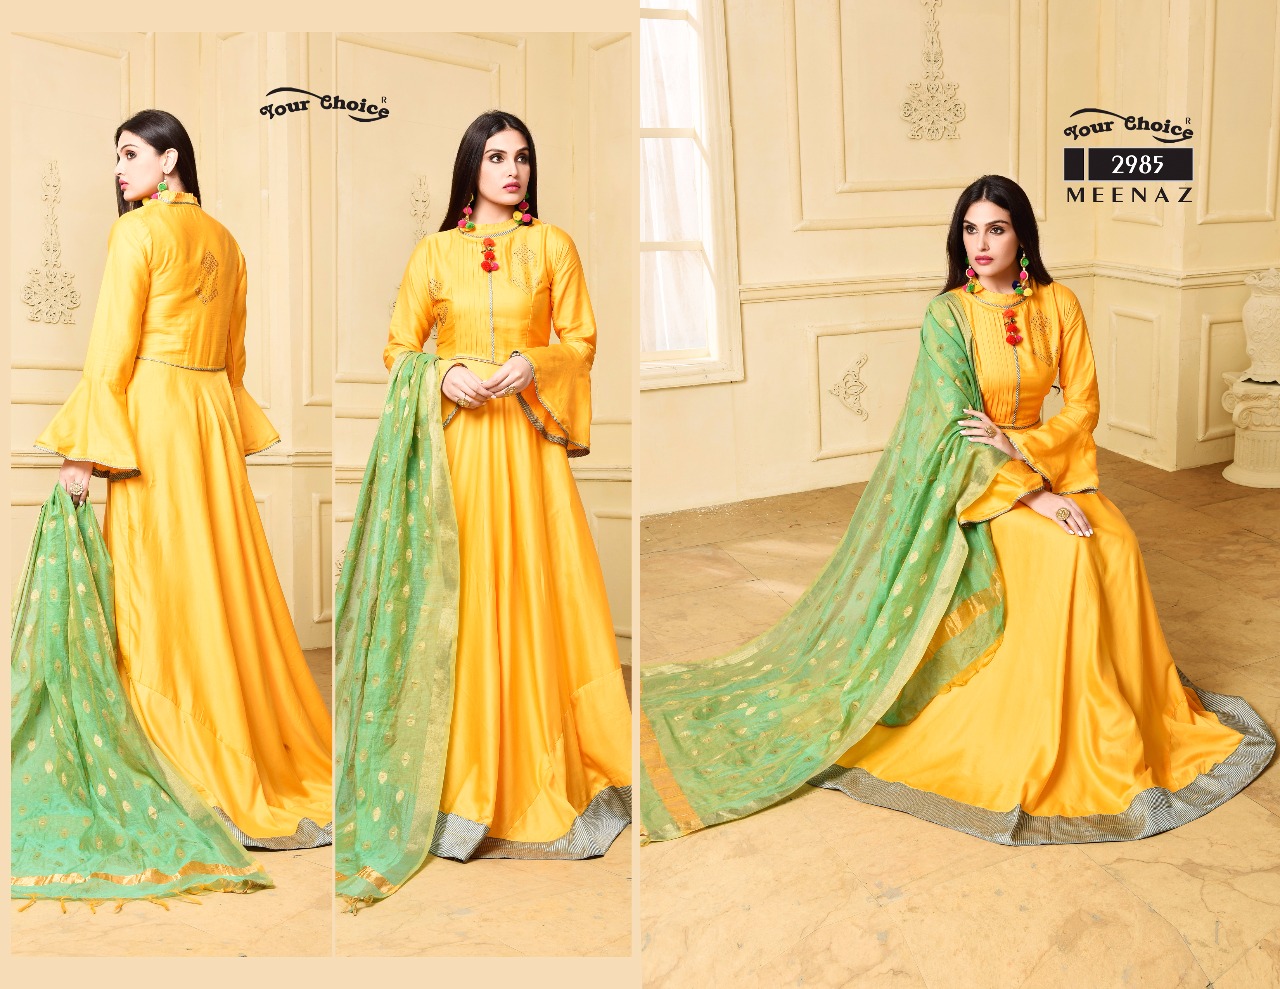 Your choice launch meenaz traditional uocoming festive season collection of gowns